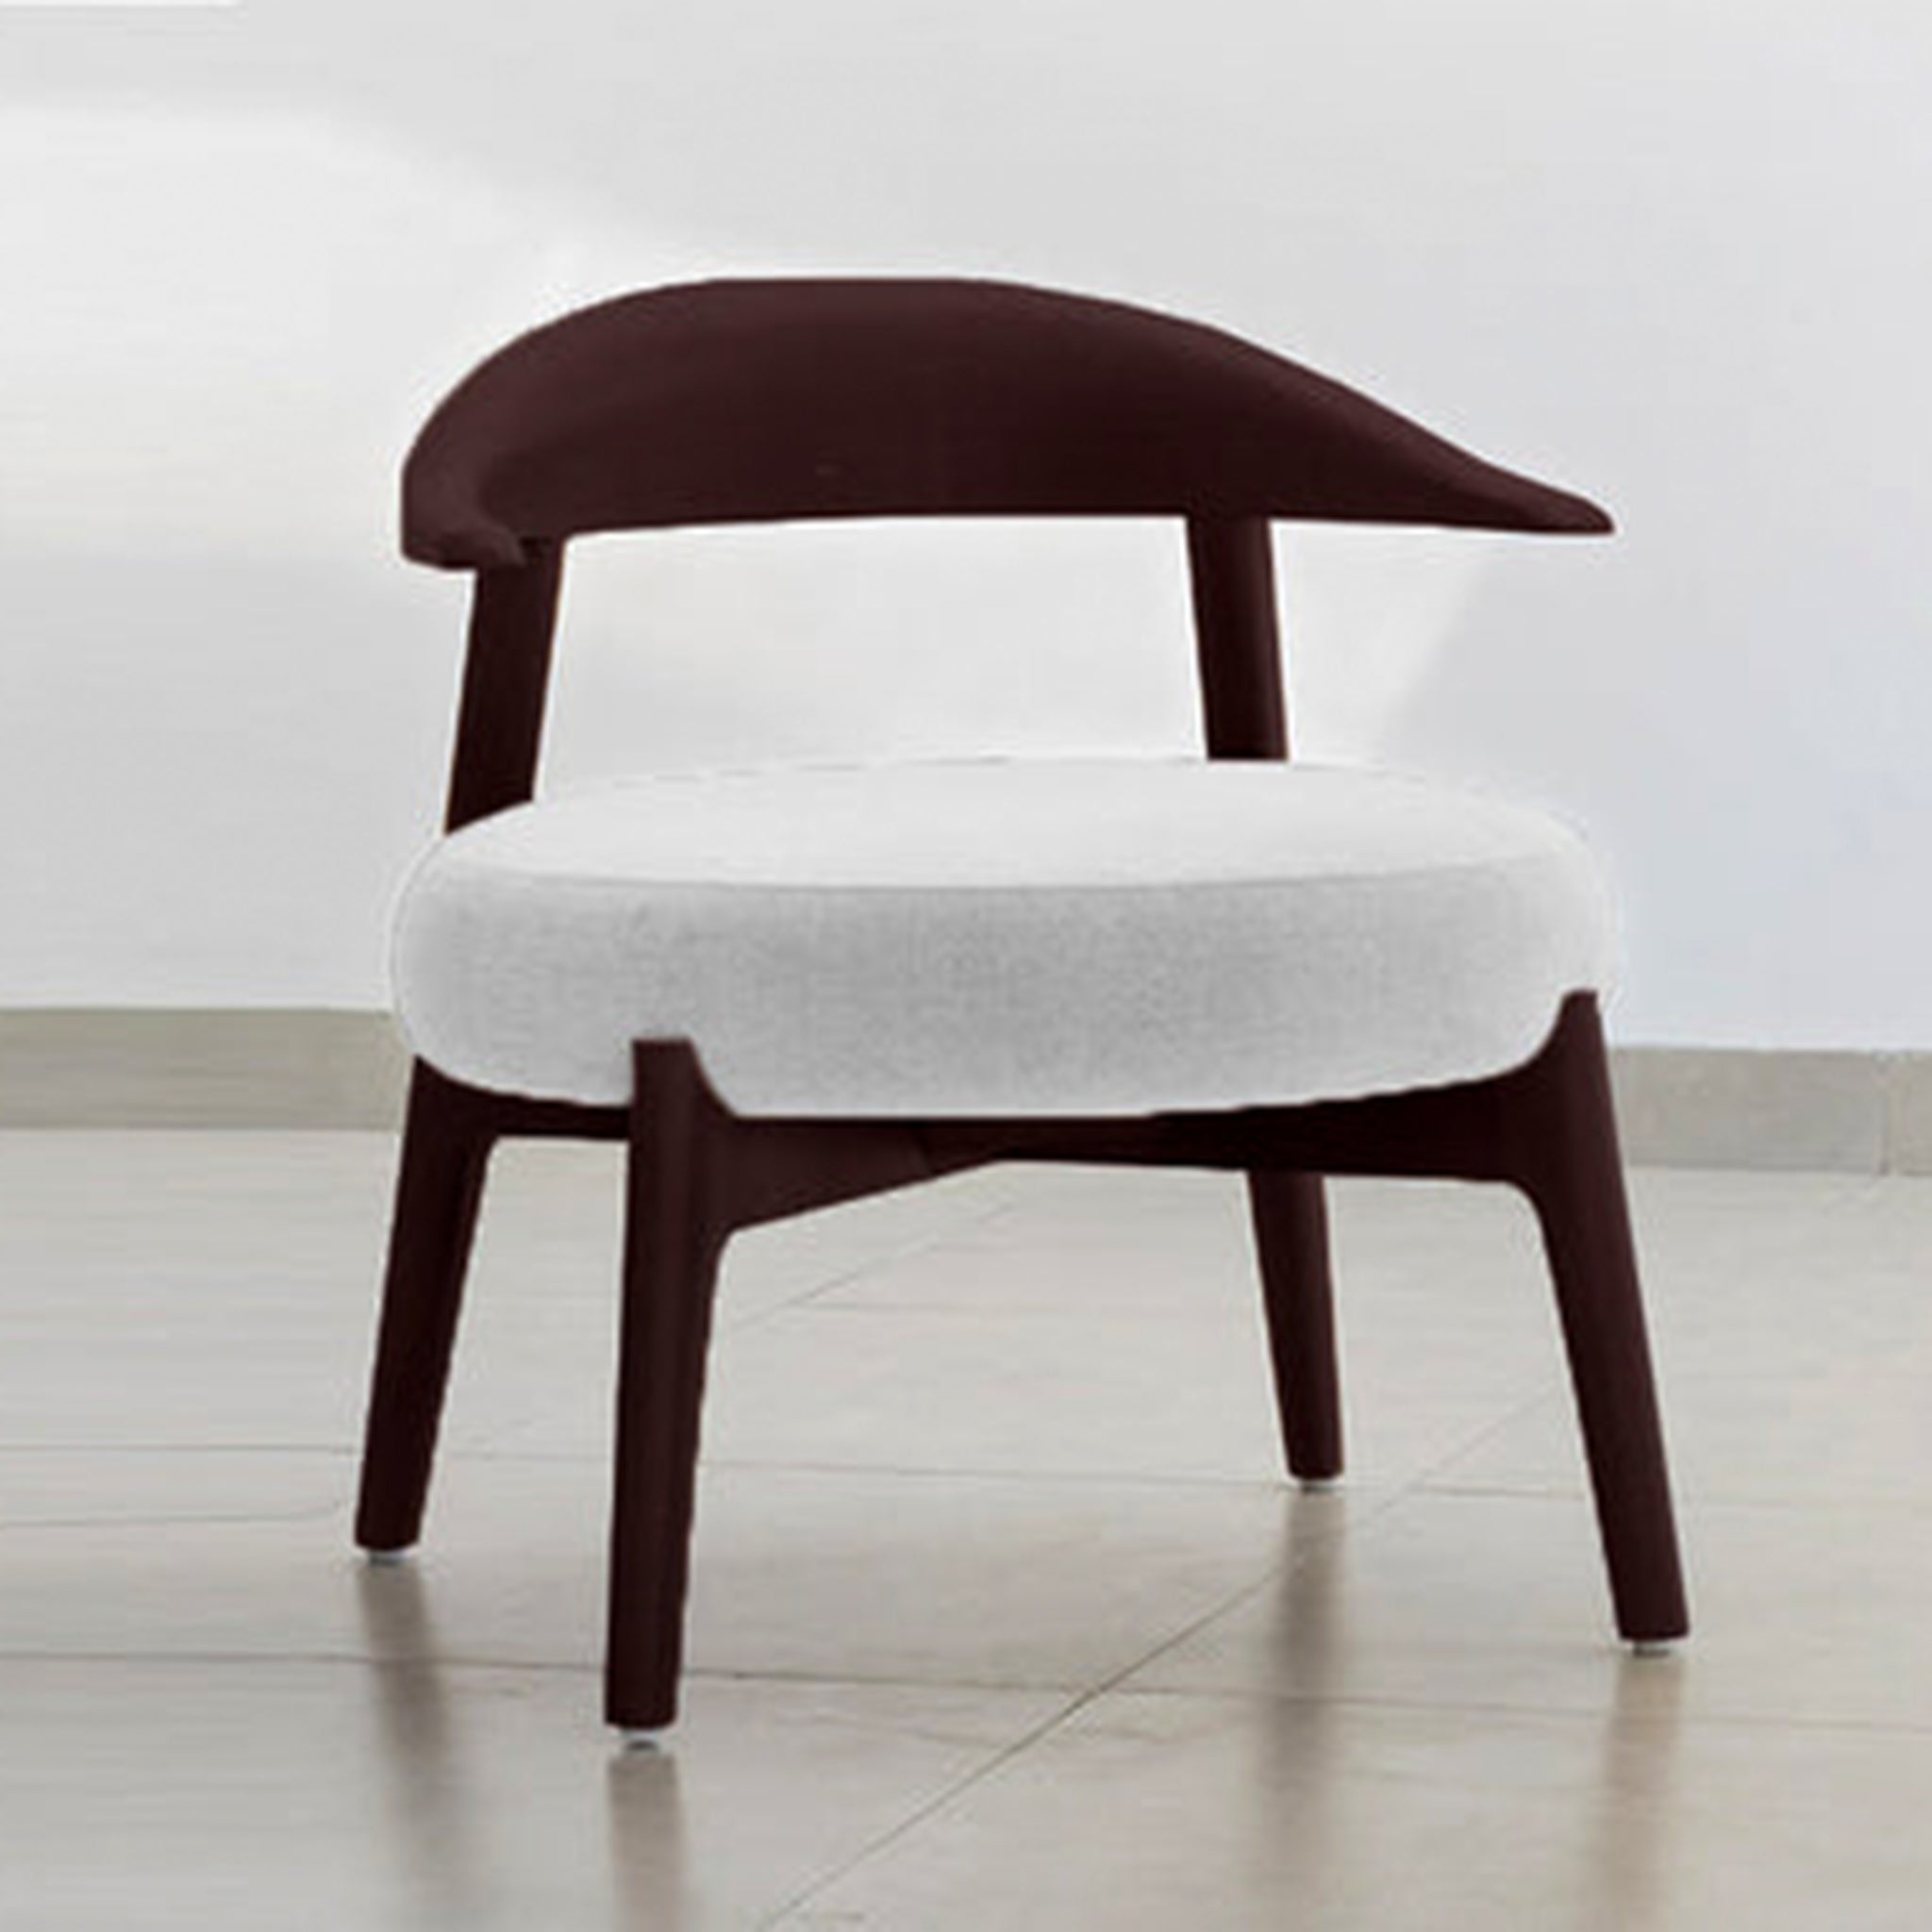 "The Hyde Accent Chair with a unique wooden frame and round cushioned seat"